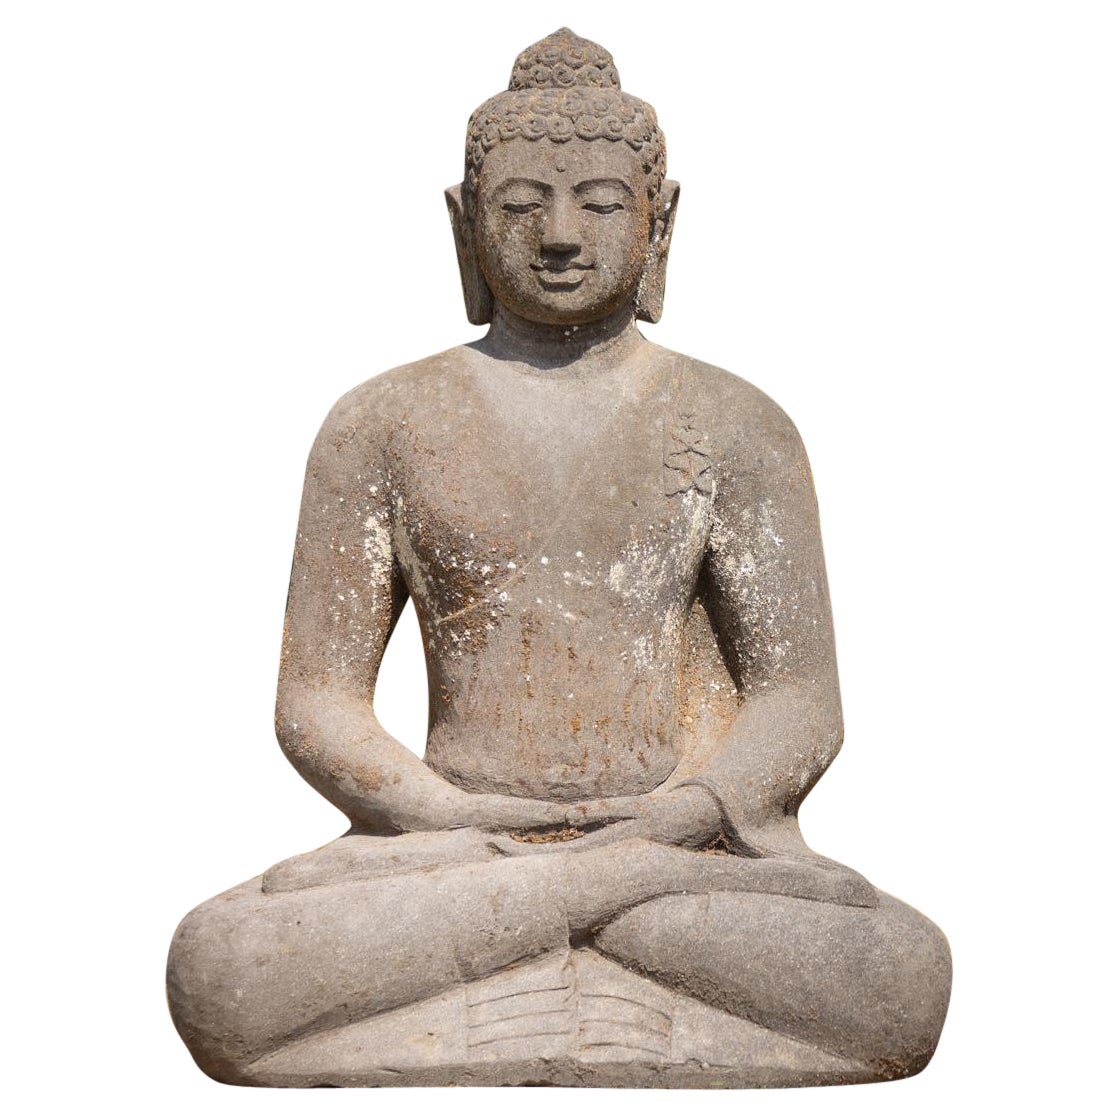 Middle 20th century large old lavastone Buddha statue in Dharmachakra mudra For Sale